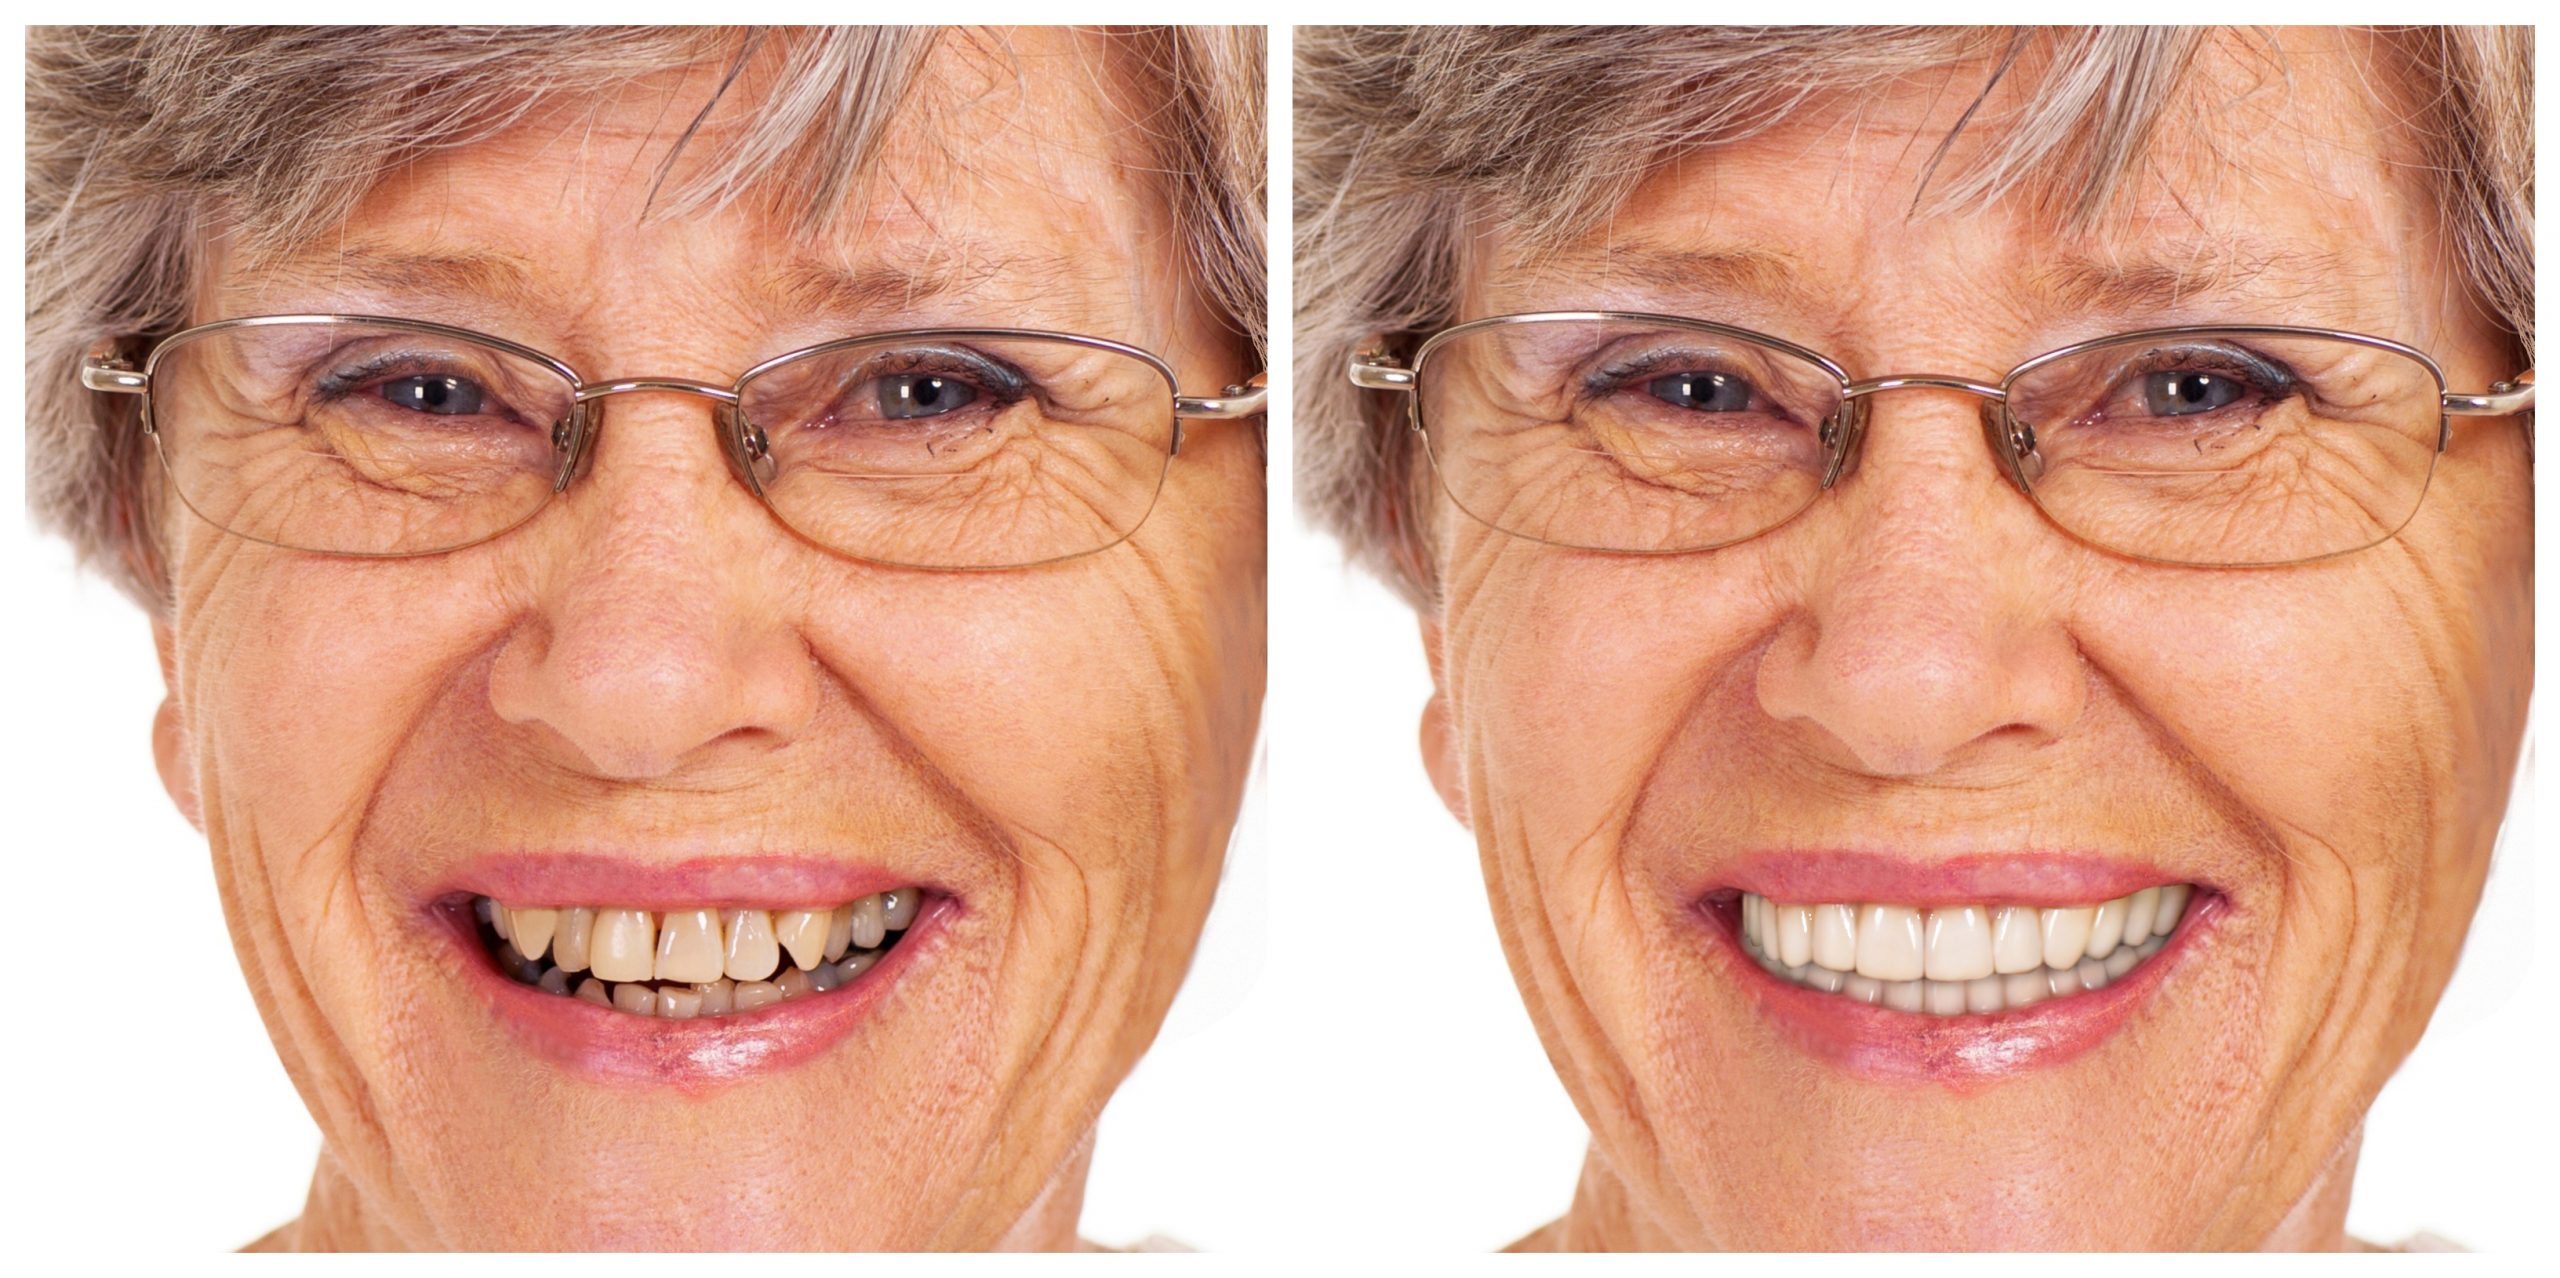 Smile Restoration - Before and After22